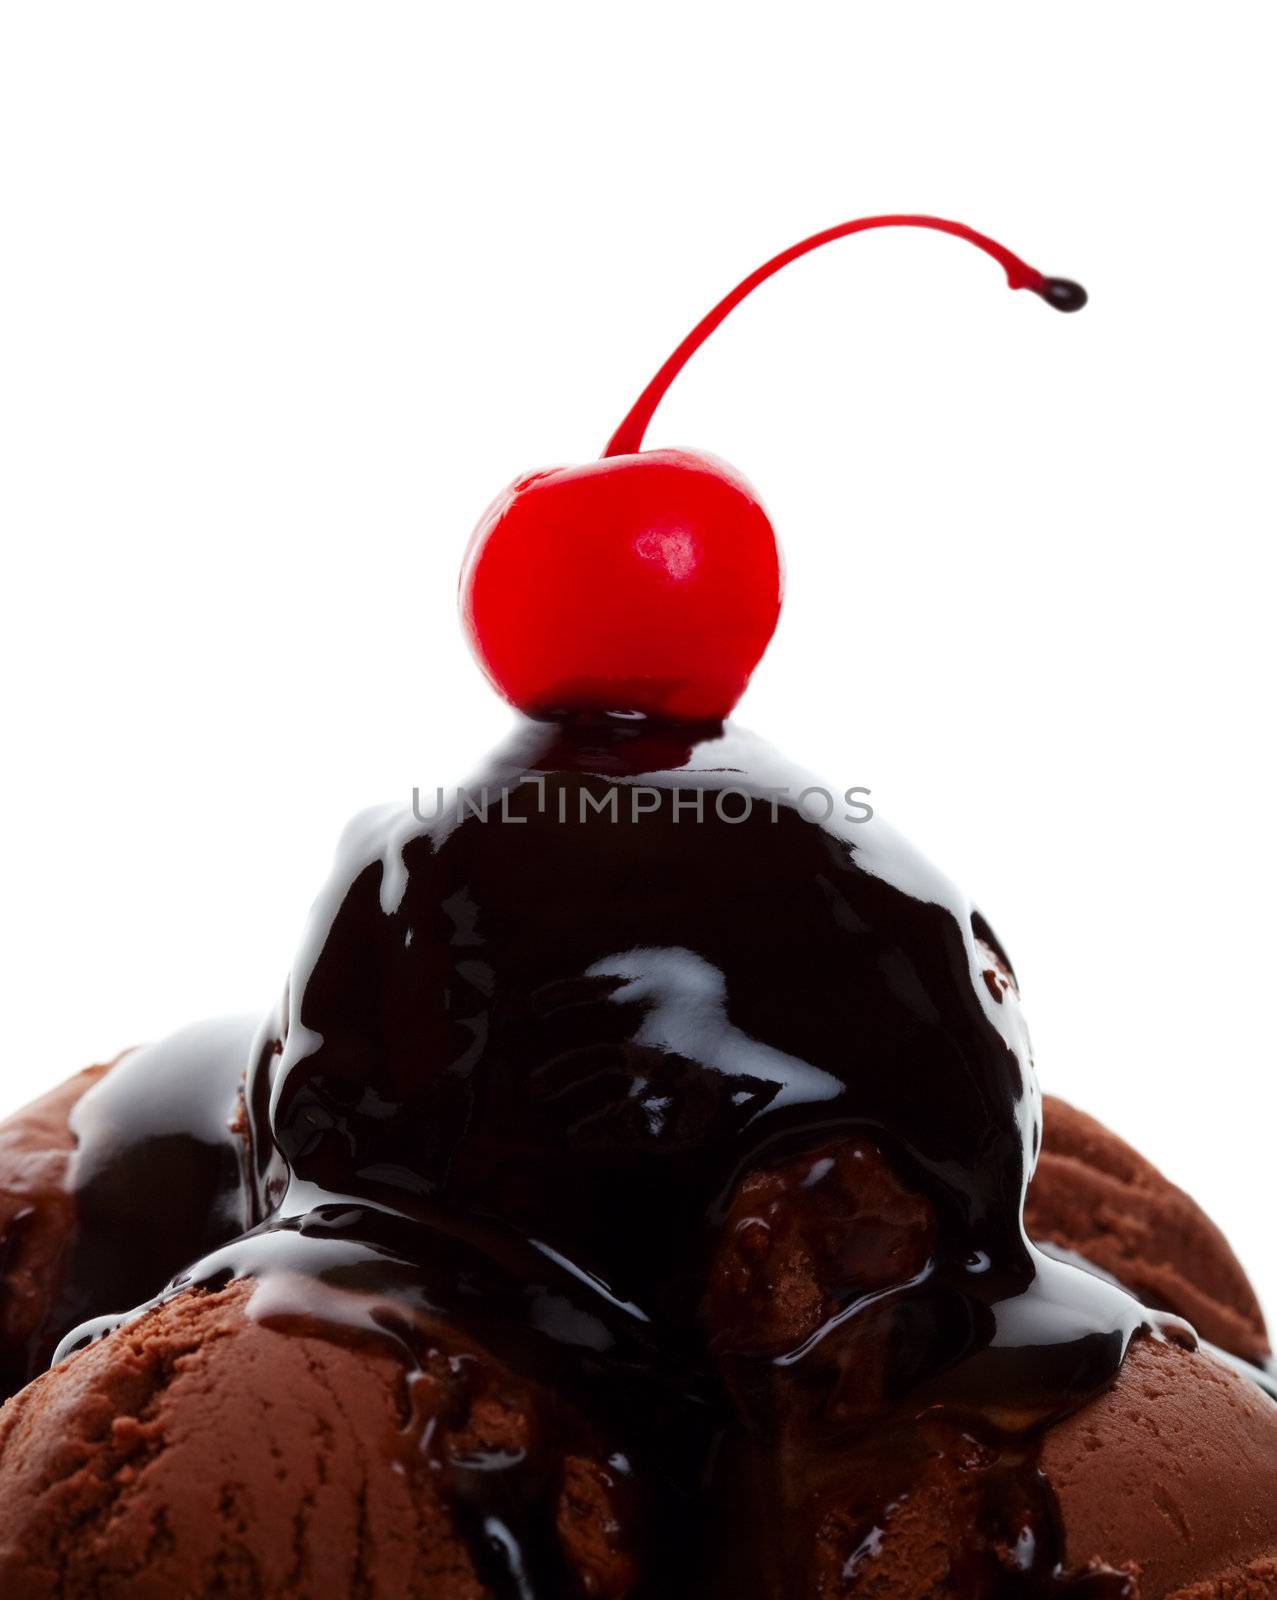 Chocolate ice cream covered with gooey chocolate syrup and topped with a yummy red cherry.  Shot on white background.